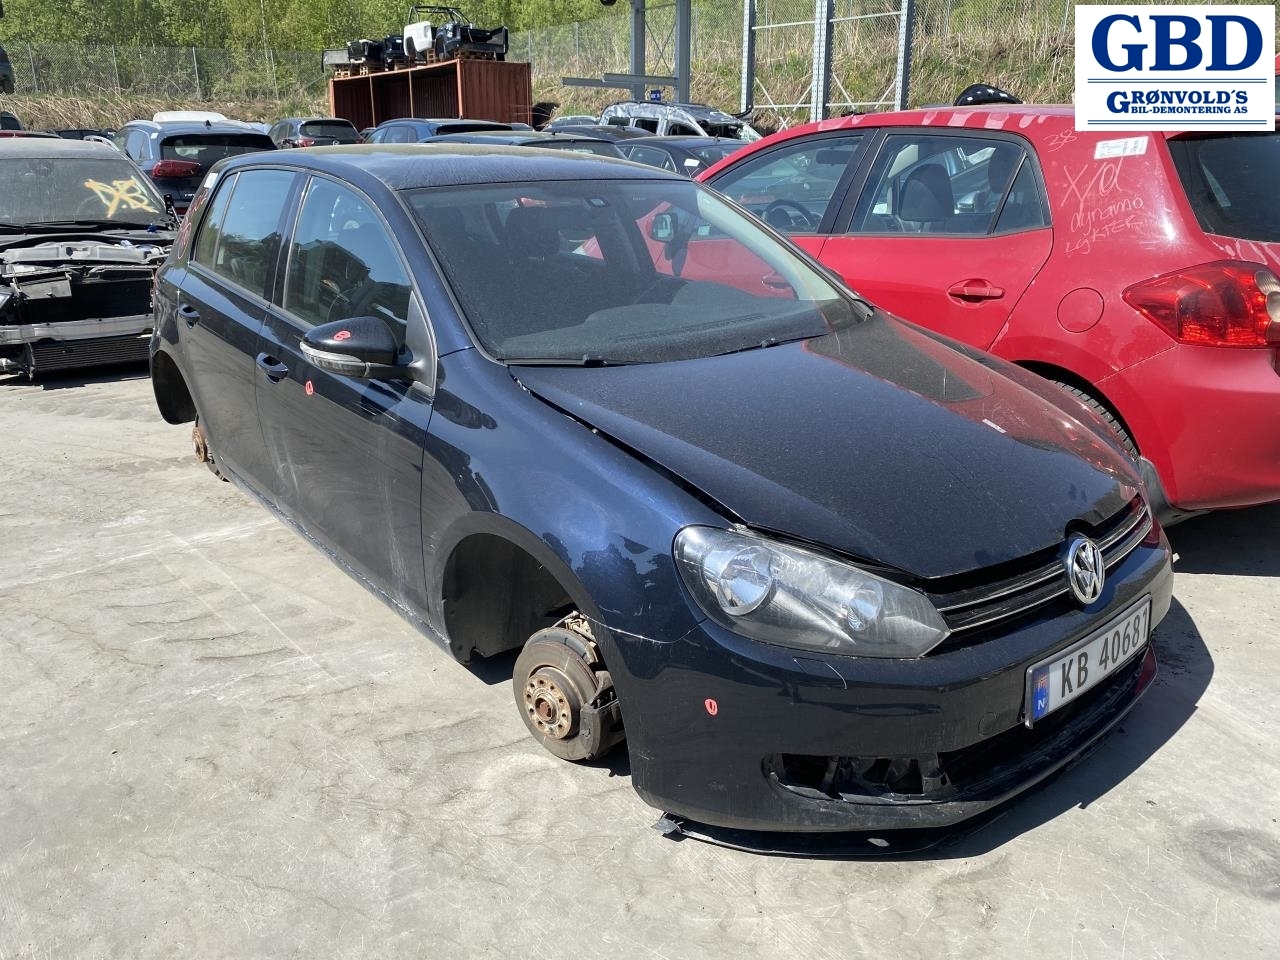 VW Golf VI, 2008-2012 parts car, Engine code: CAYC, Gearbox code: LUB